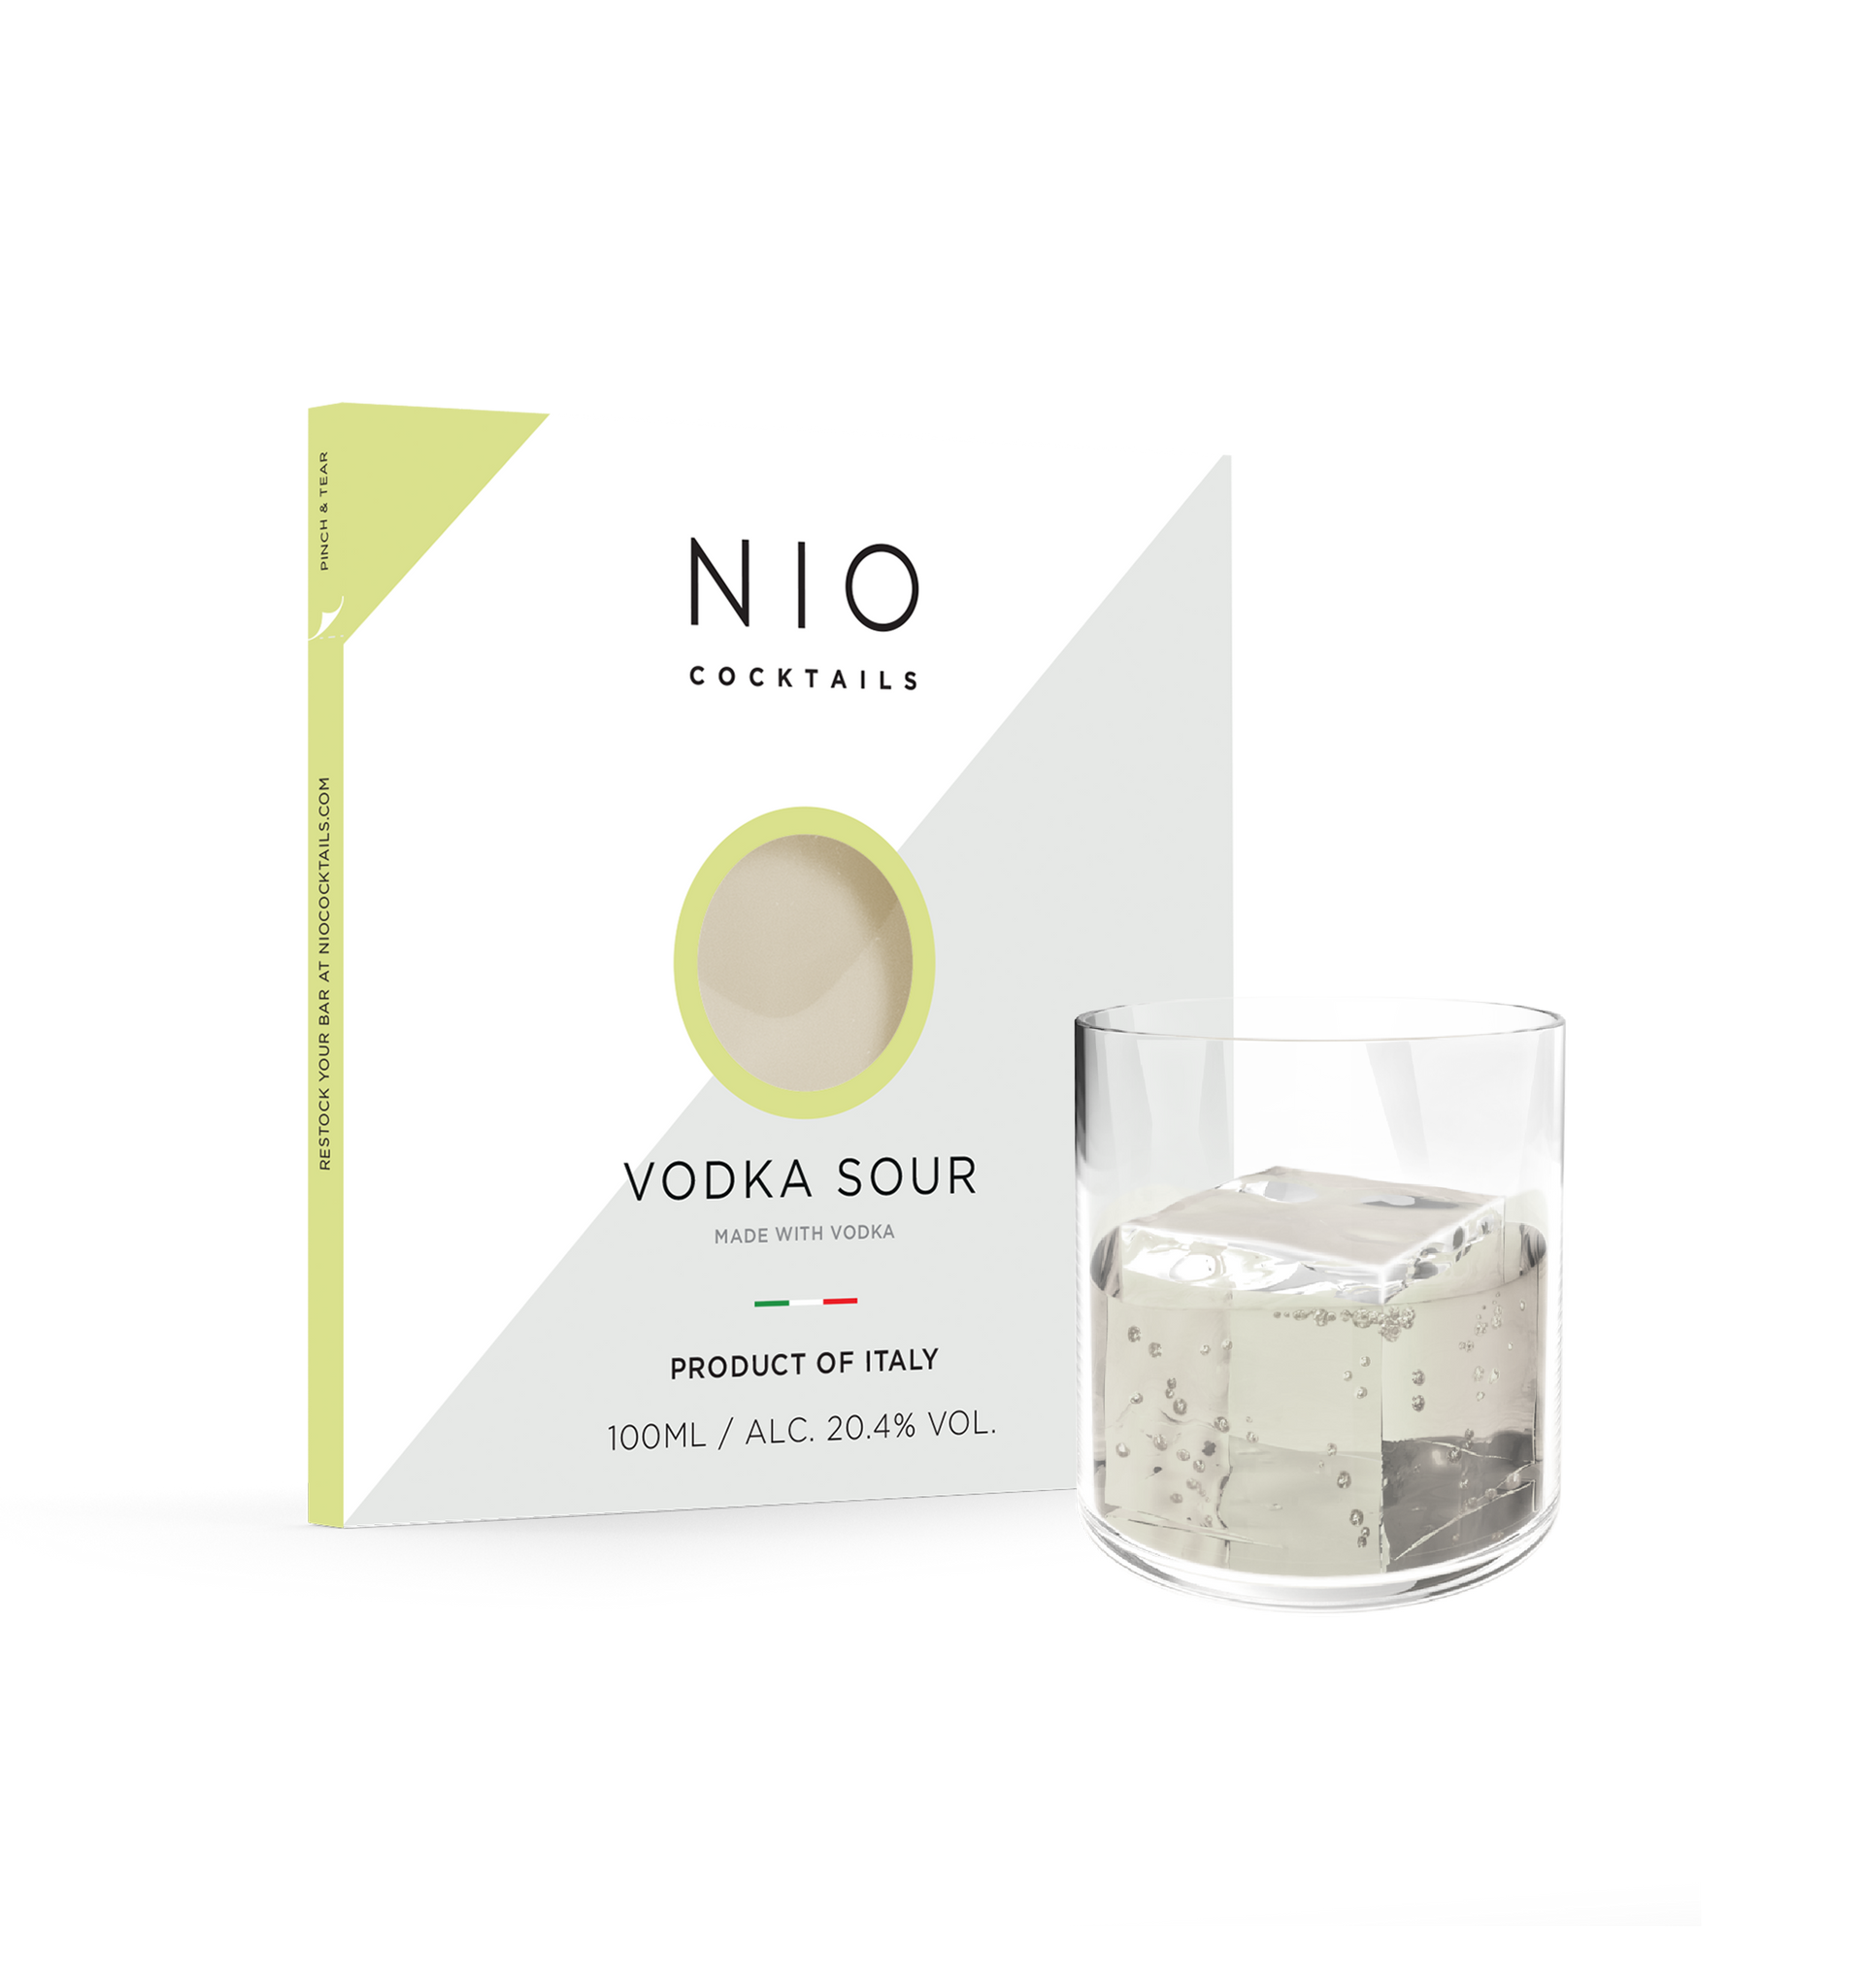 Vodka Sour  A refreshing mixture of Premium Vodka and lemon, with a touch of sweetness